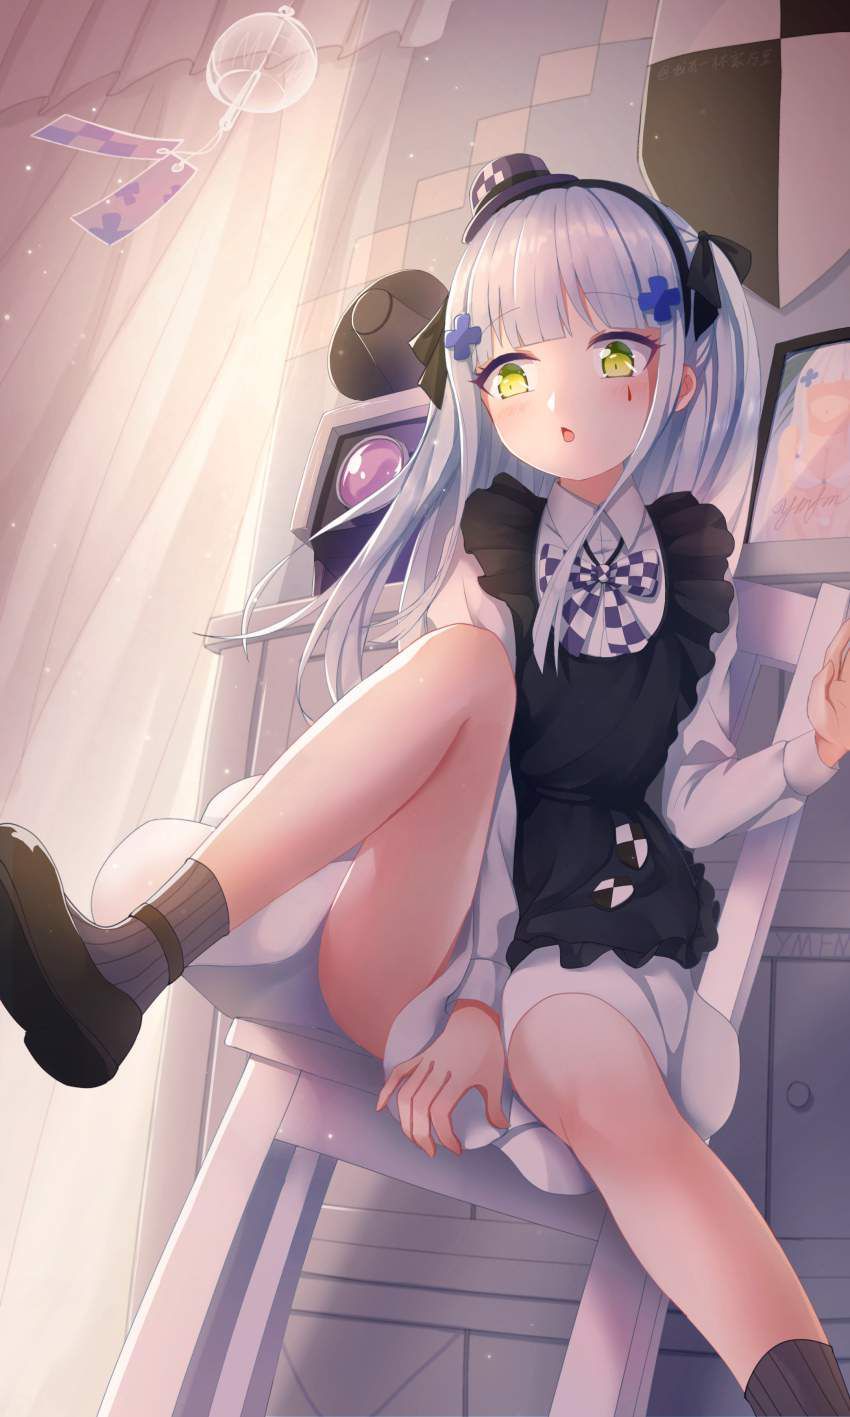 Erotic image Dolls frontline HK416 and A secondary erotic image that makes you want to H like a cartoon 17